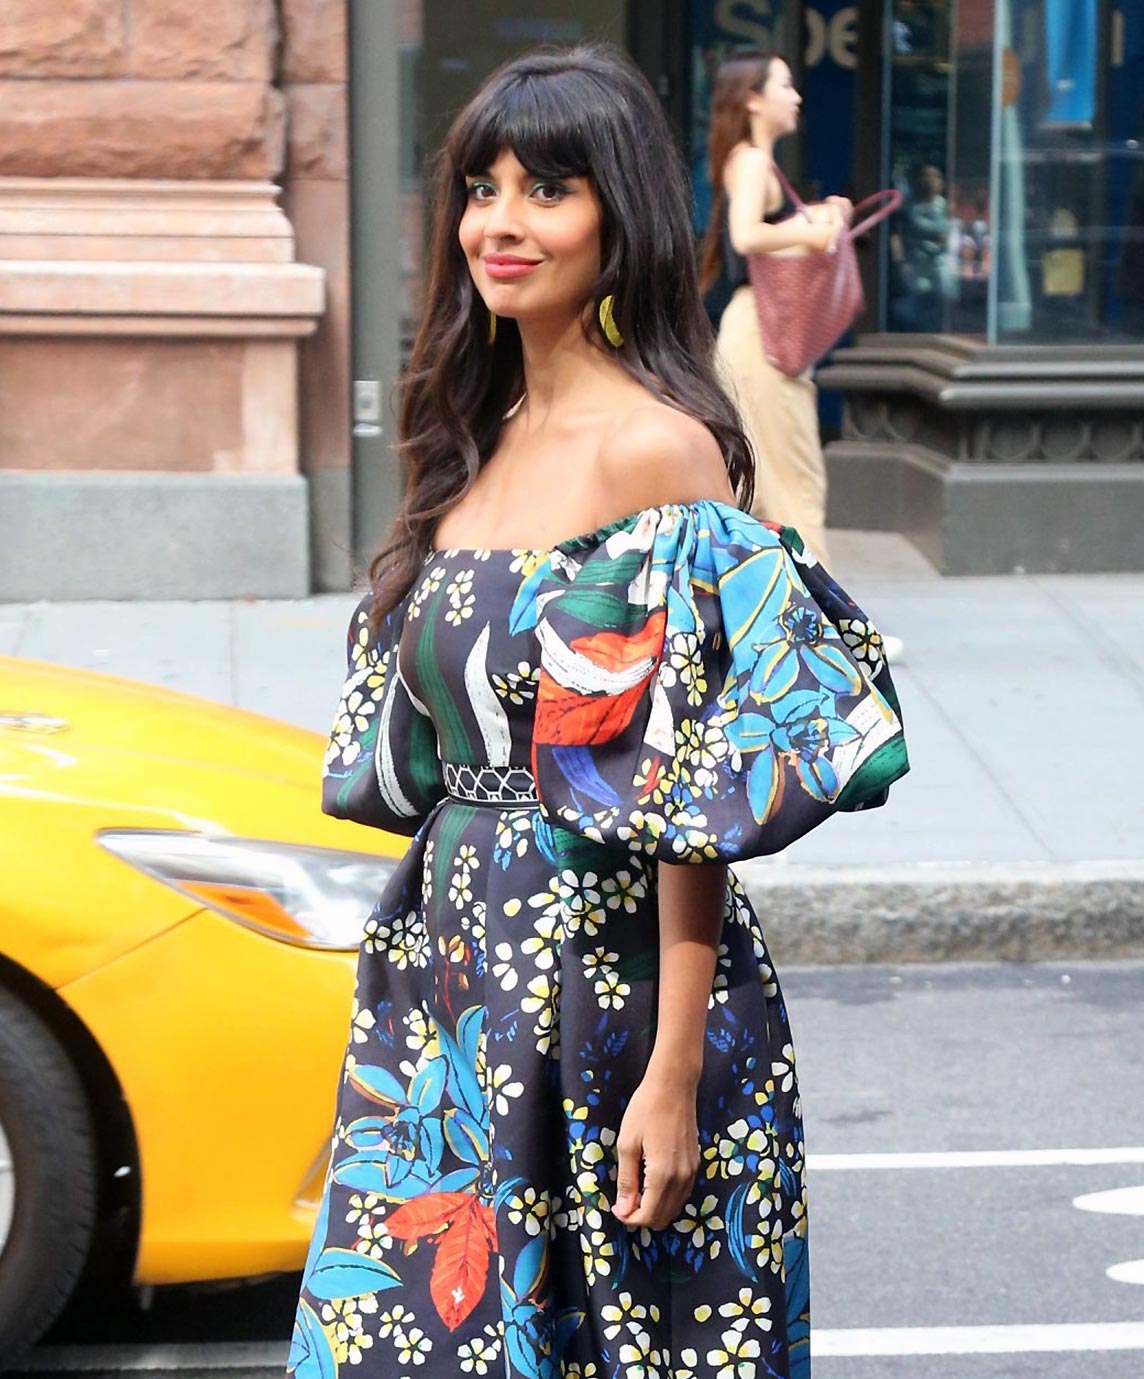 Jameela Jamil Sexy in a Floral Dress.